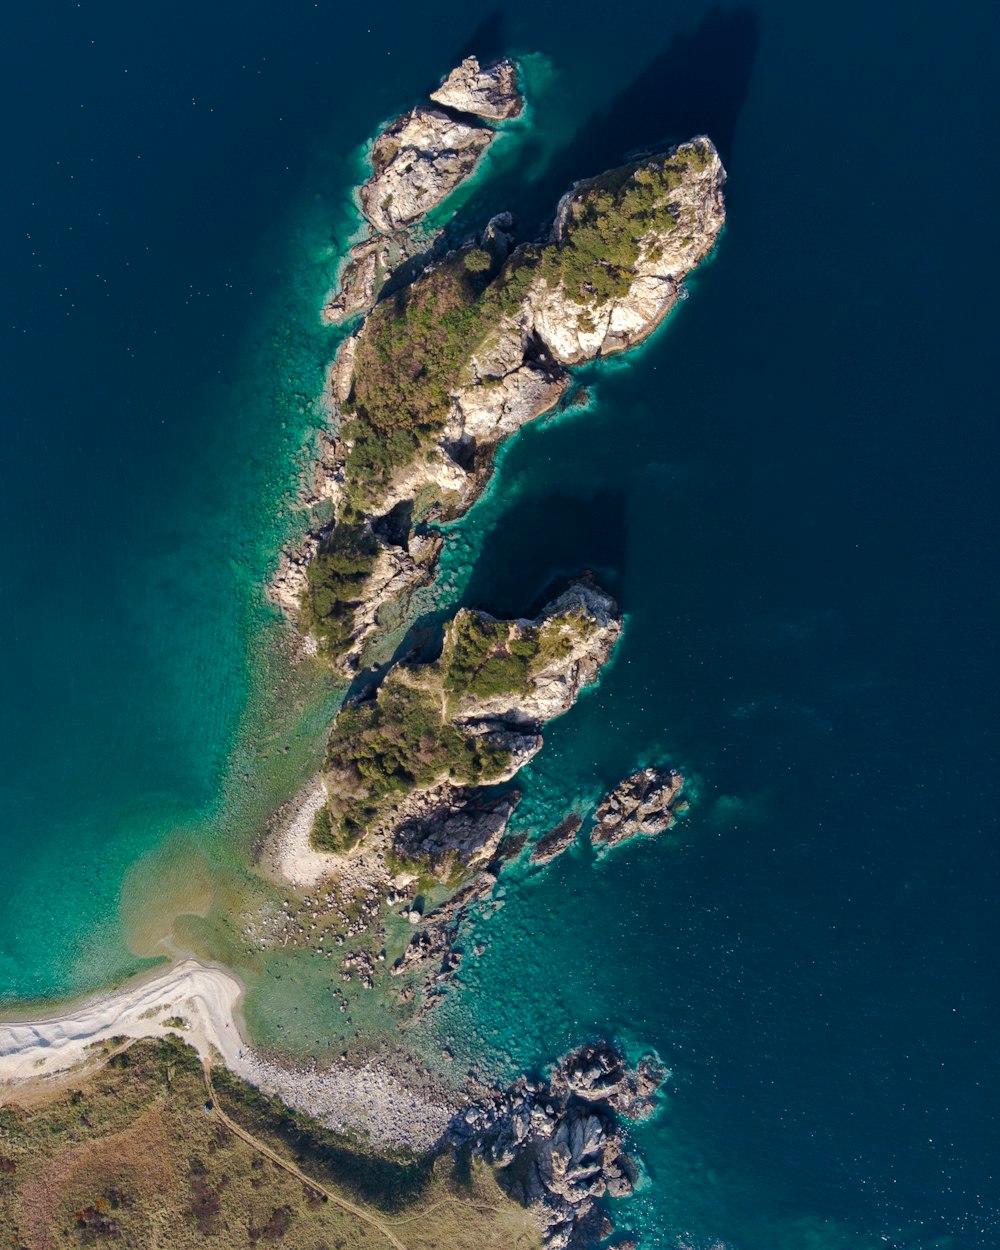 an aerial view of an island in the ocean